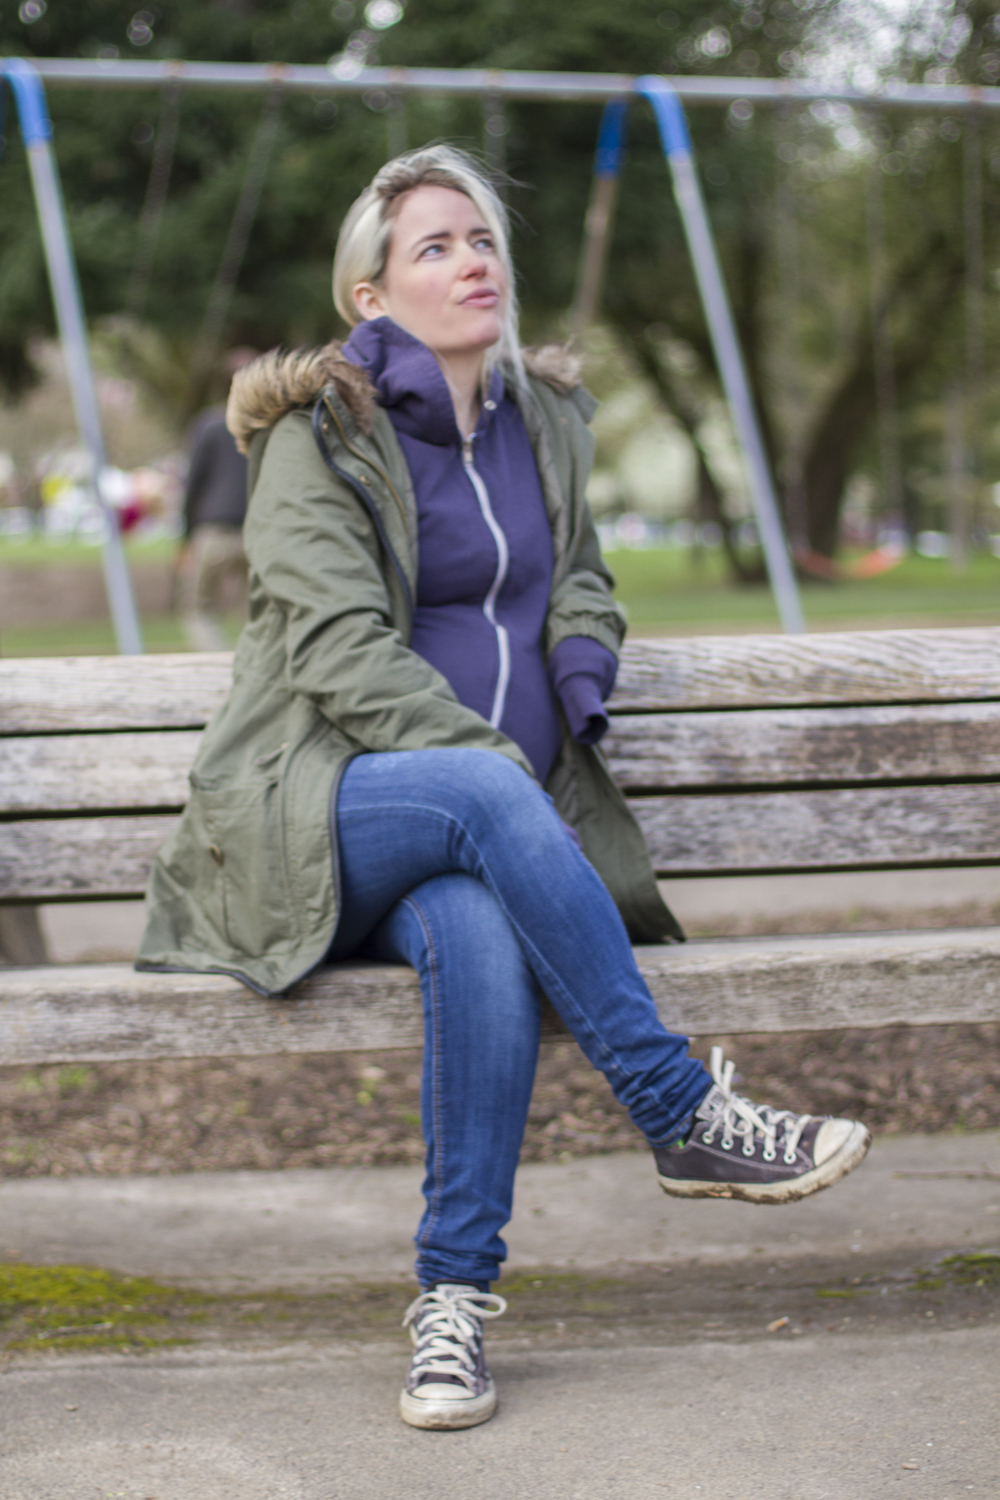 Megan sitting on a park bench looking towards the sky with a pregnant belly